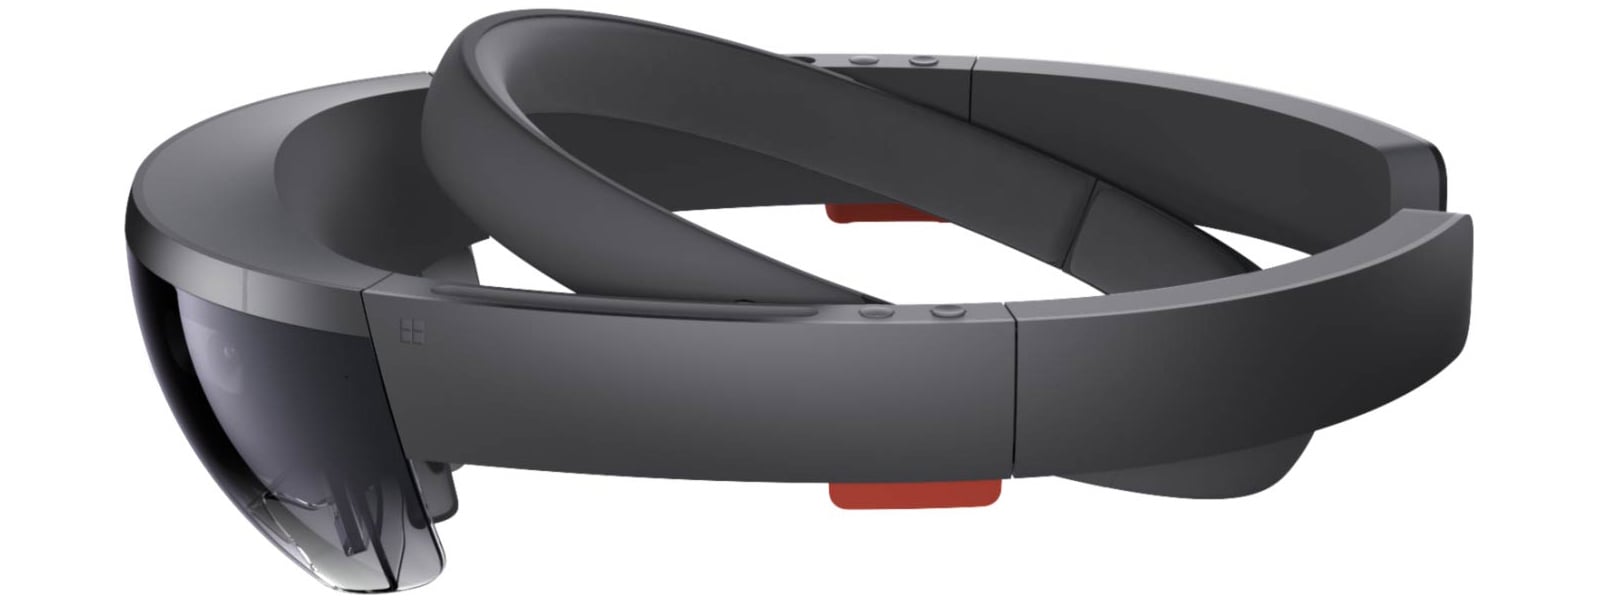 Hololens side view